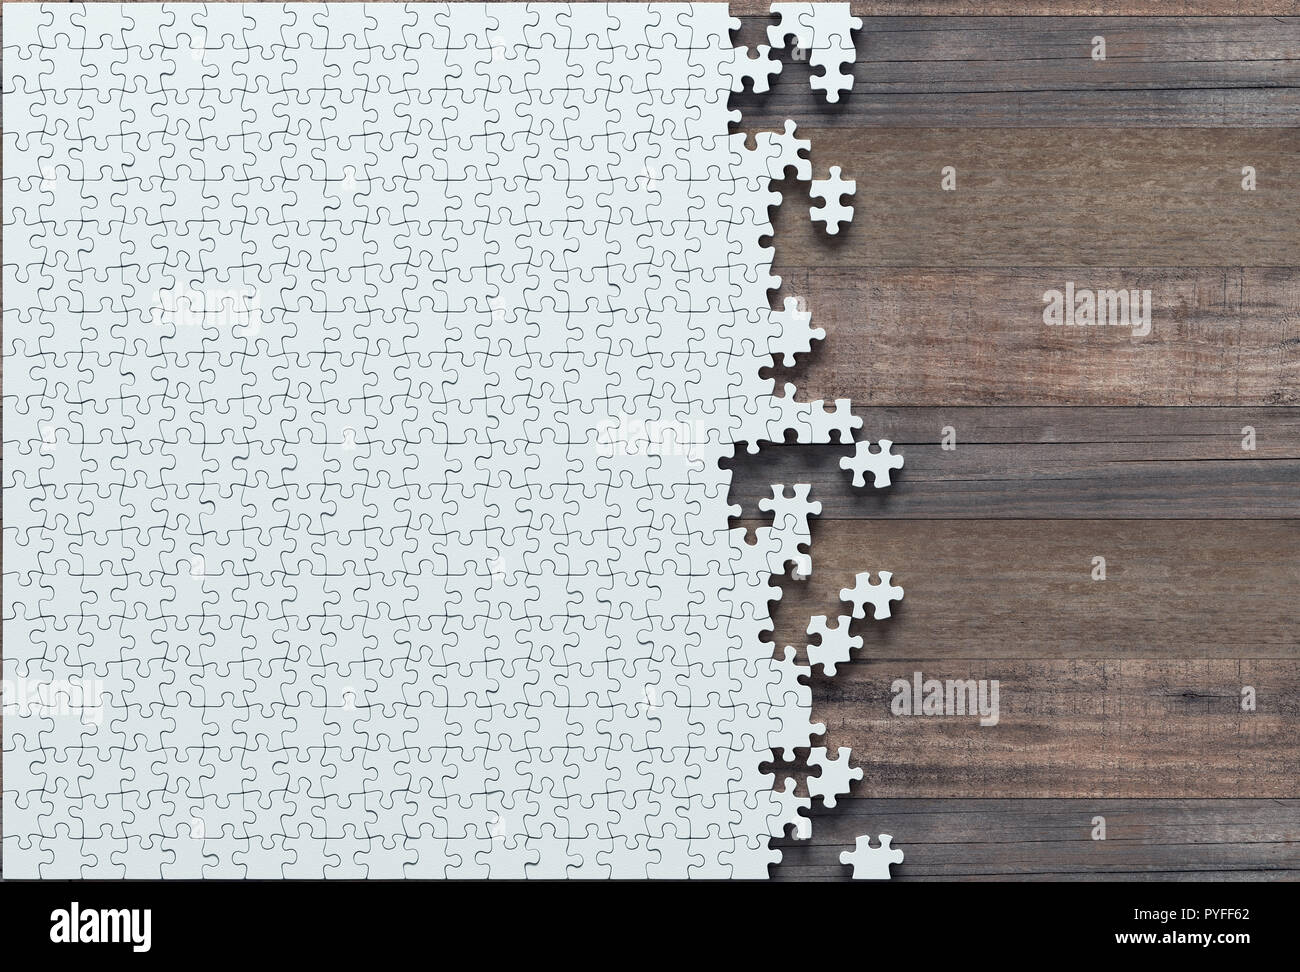 Blank jigsaw puzzle missing half to finish. Concept of work not completed. Stock Photo